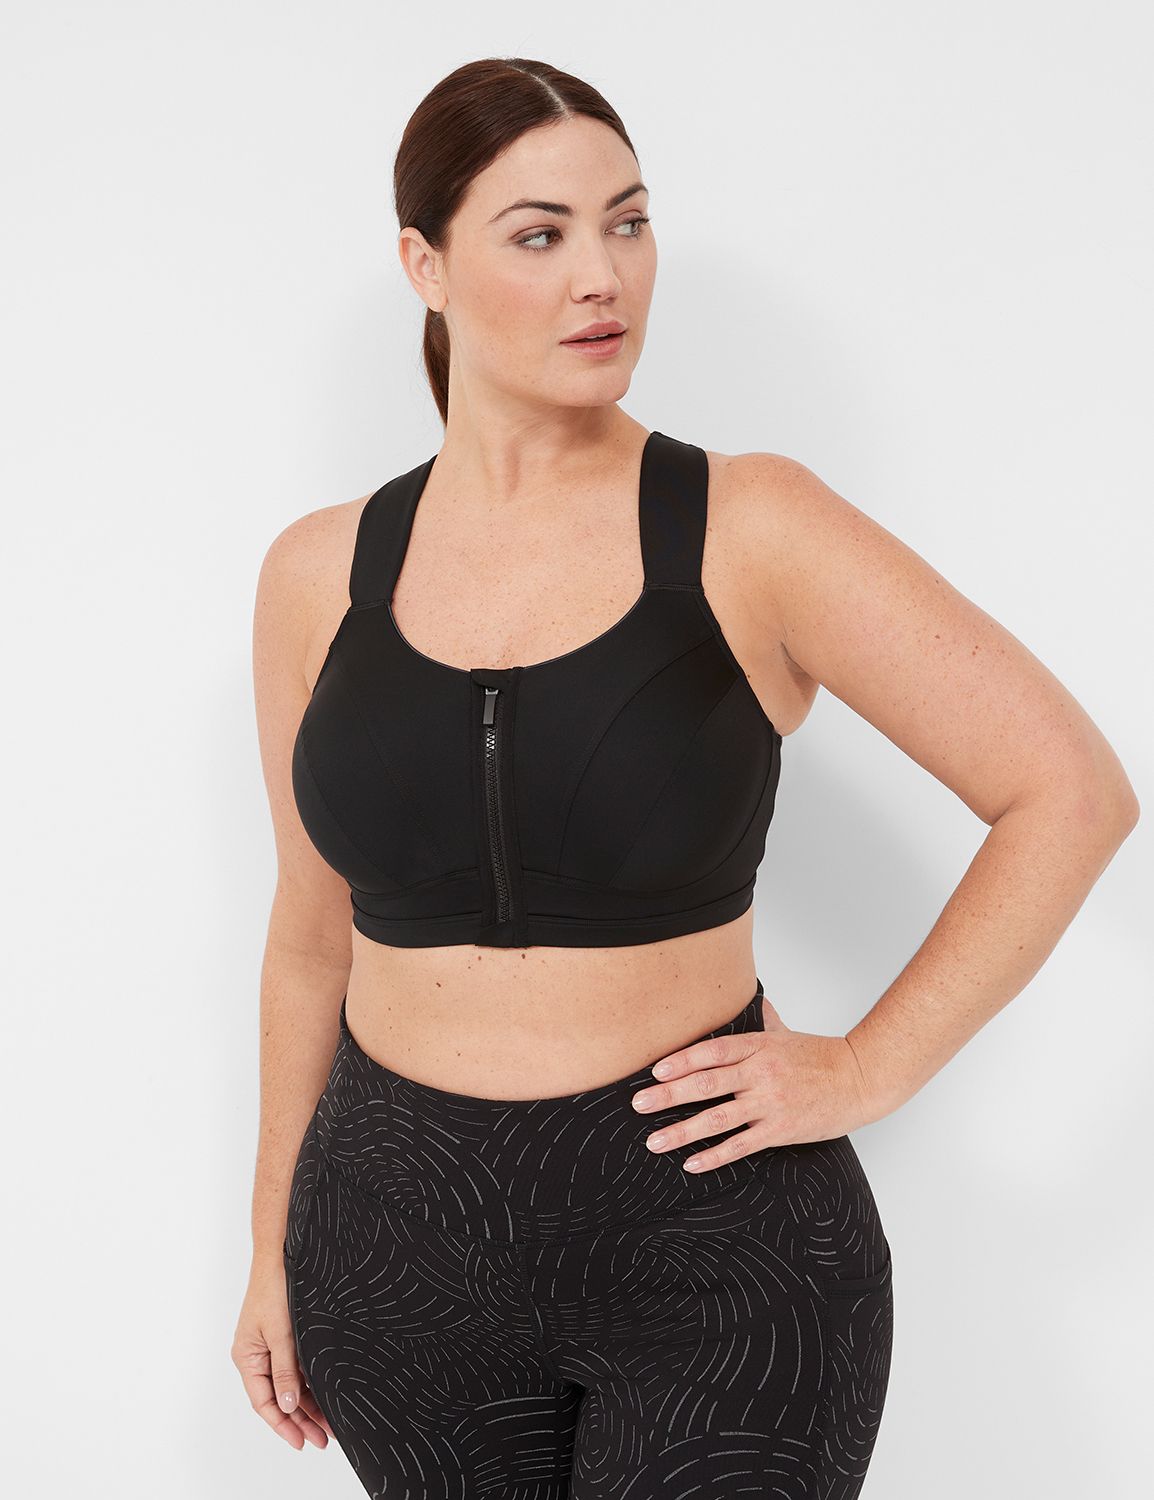 Size 44H Moisture Wicking Plus Size Bras, Shirts, & More